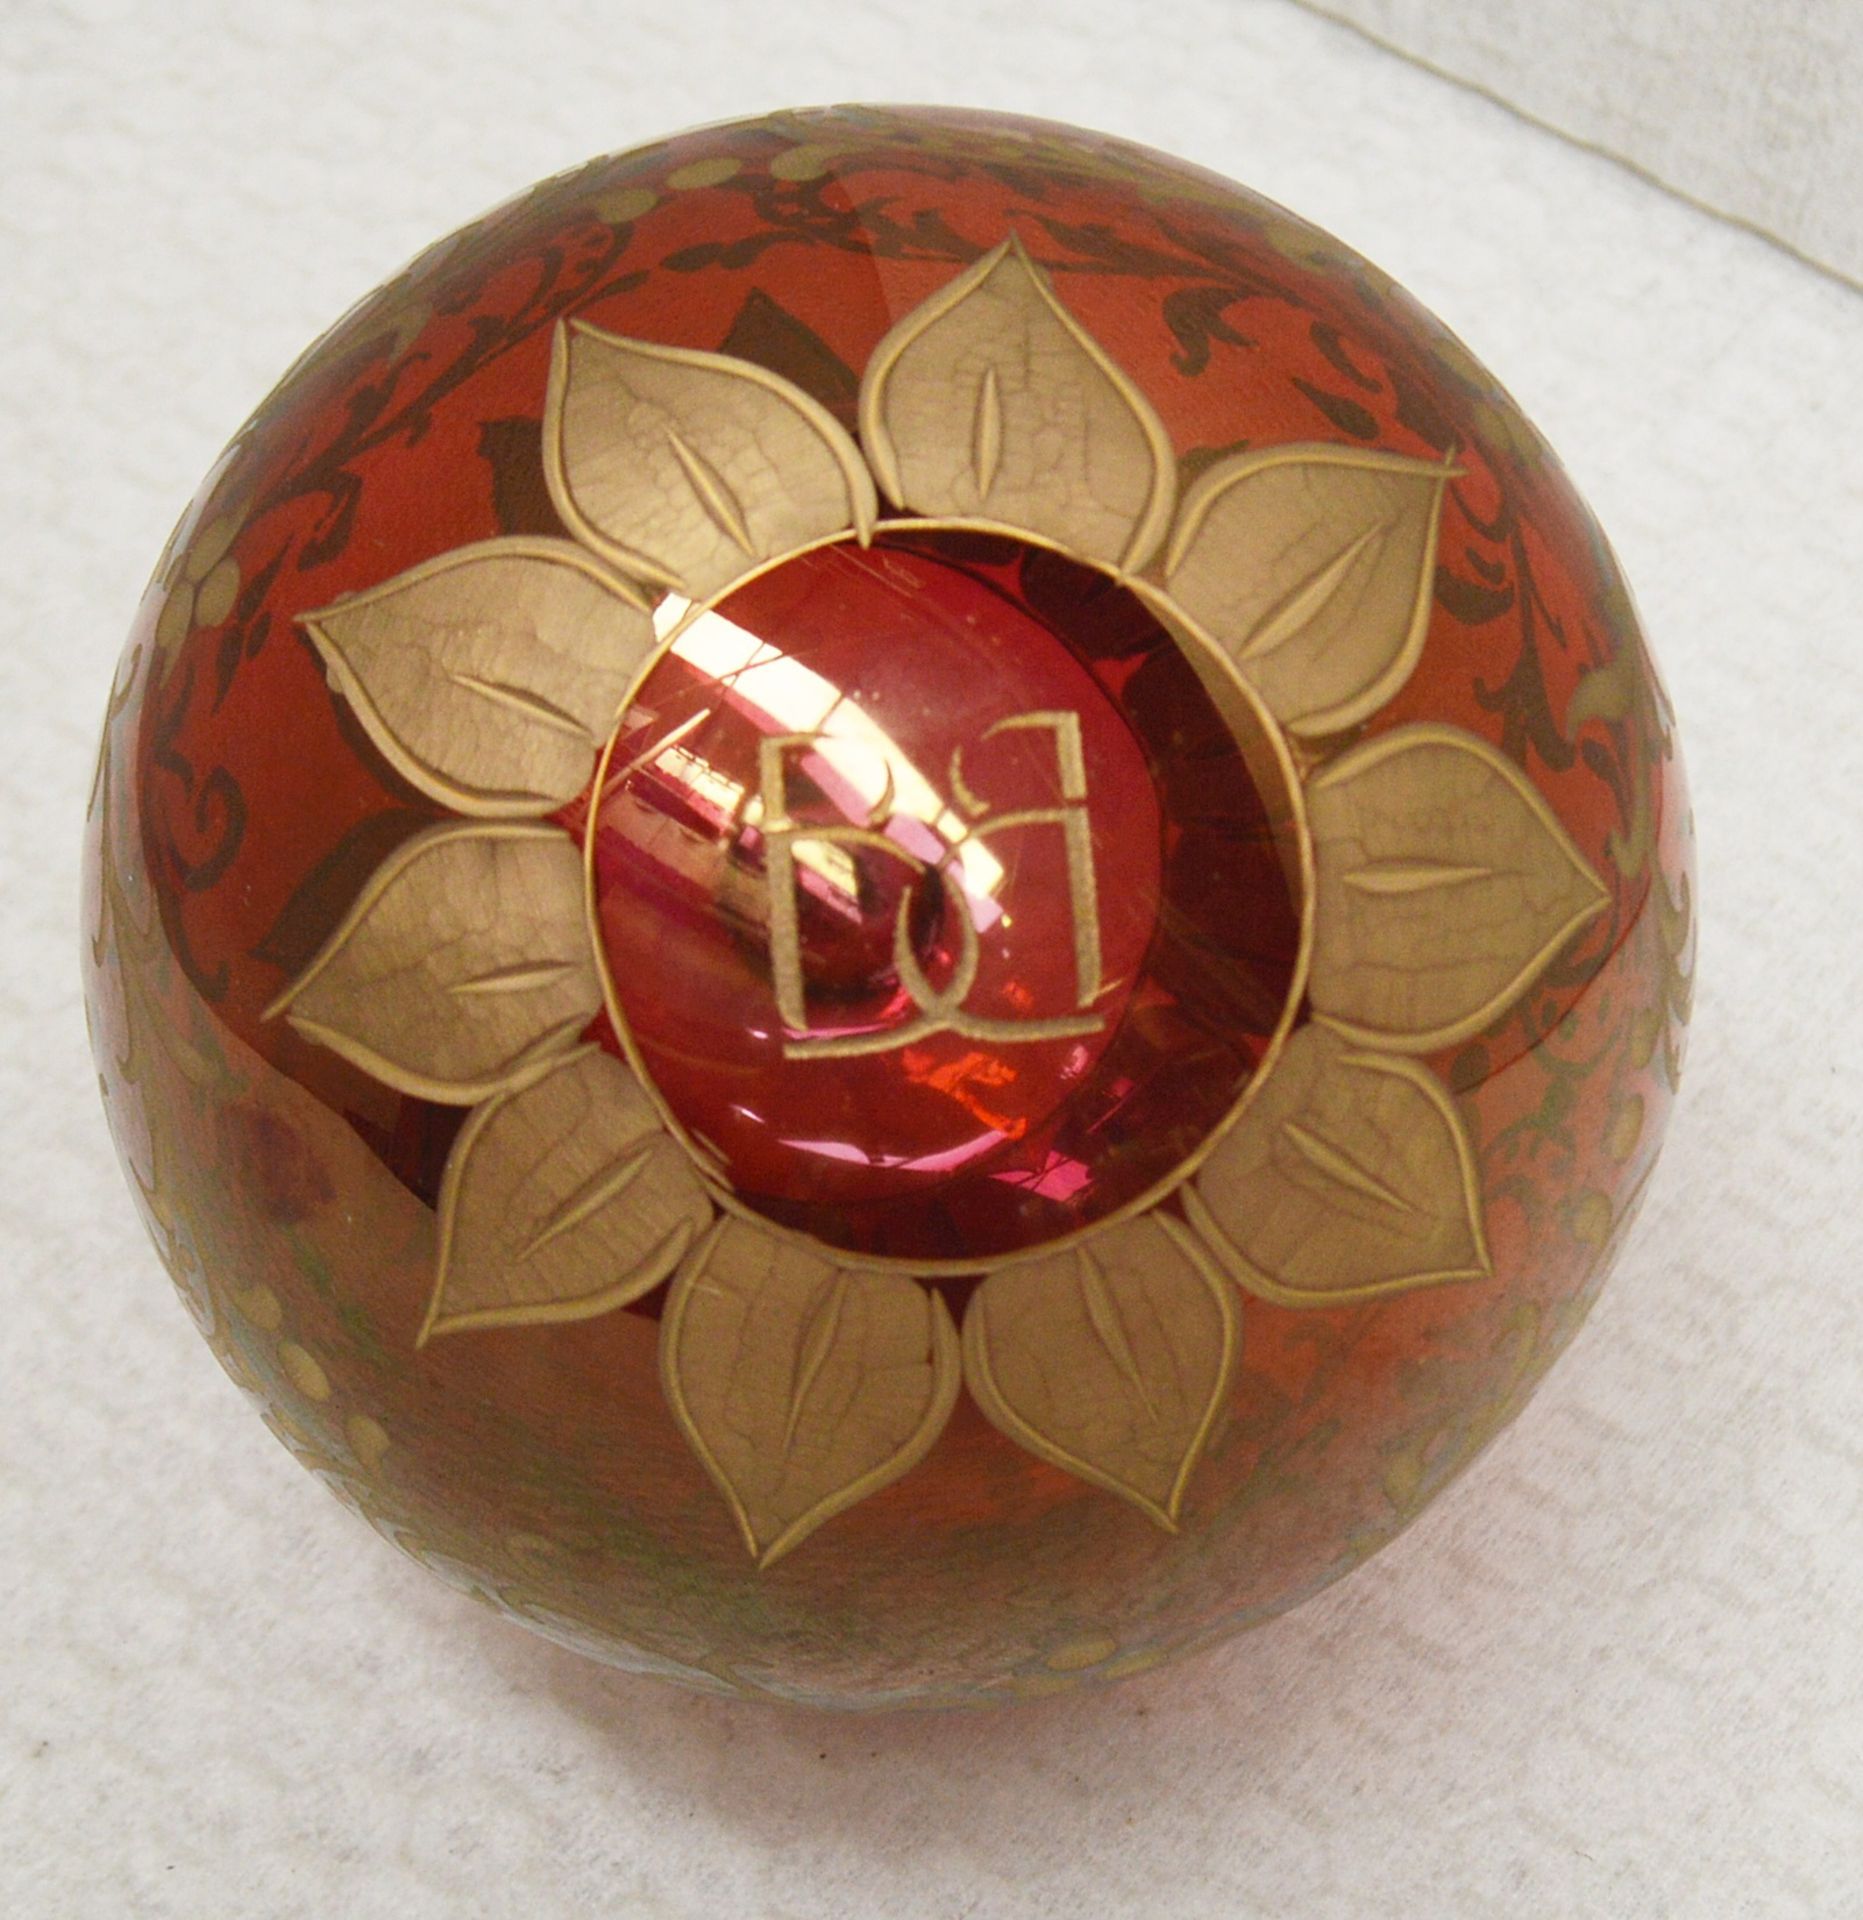 1 x BALDI 'Home Jewels' Italian Hand-crafted Artisan Glass Christmas Tree Decoration In Red and Gold - Image 4 of 4